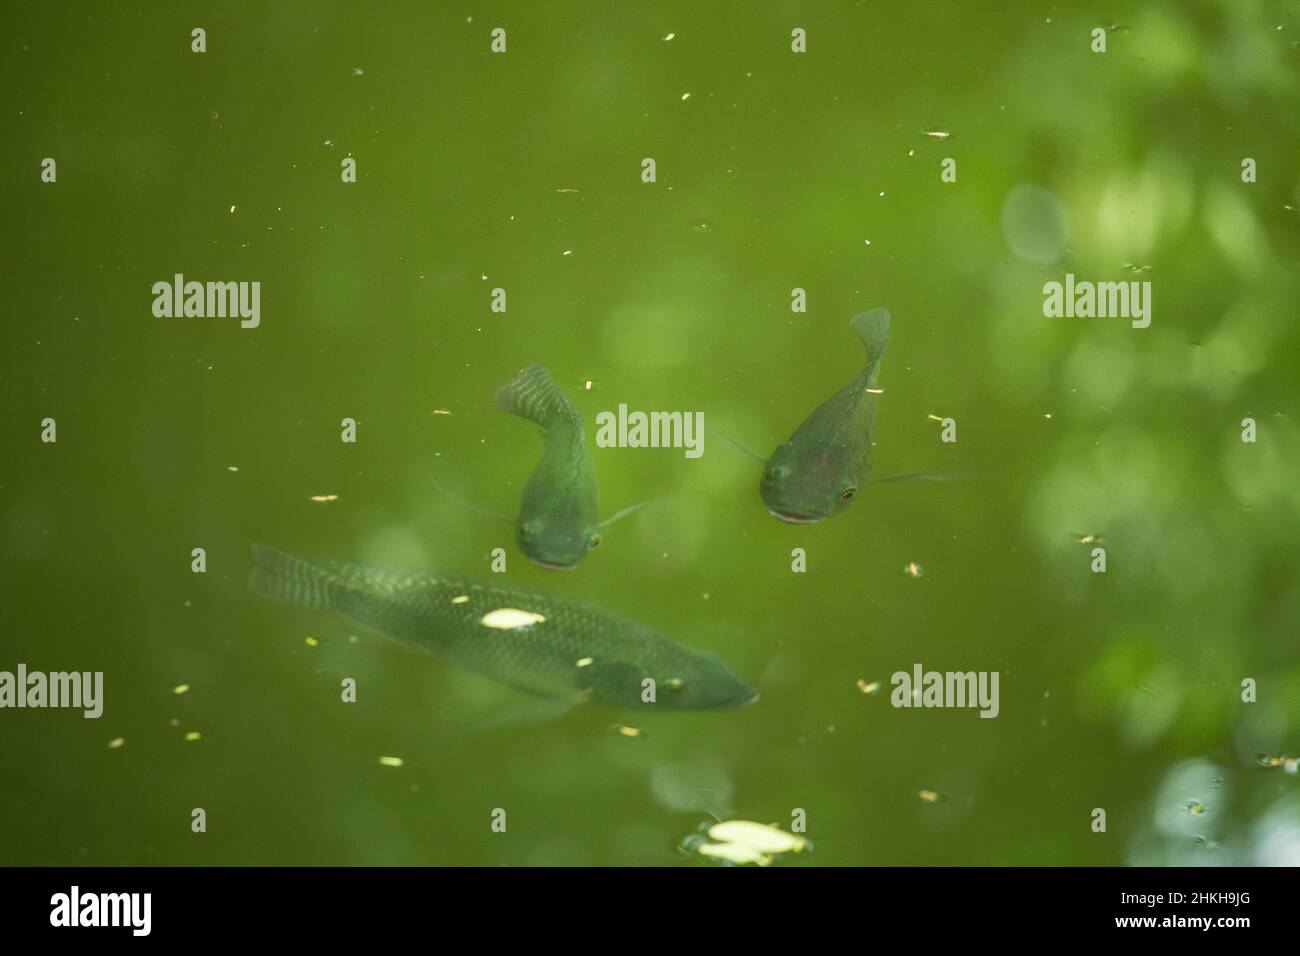 Green Tilapia fish swimming in a pond Stock Photo